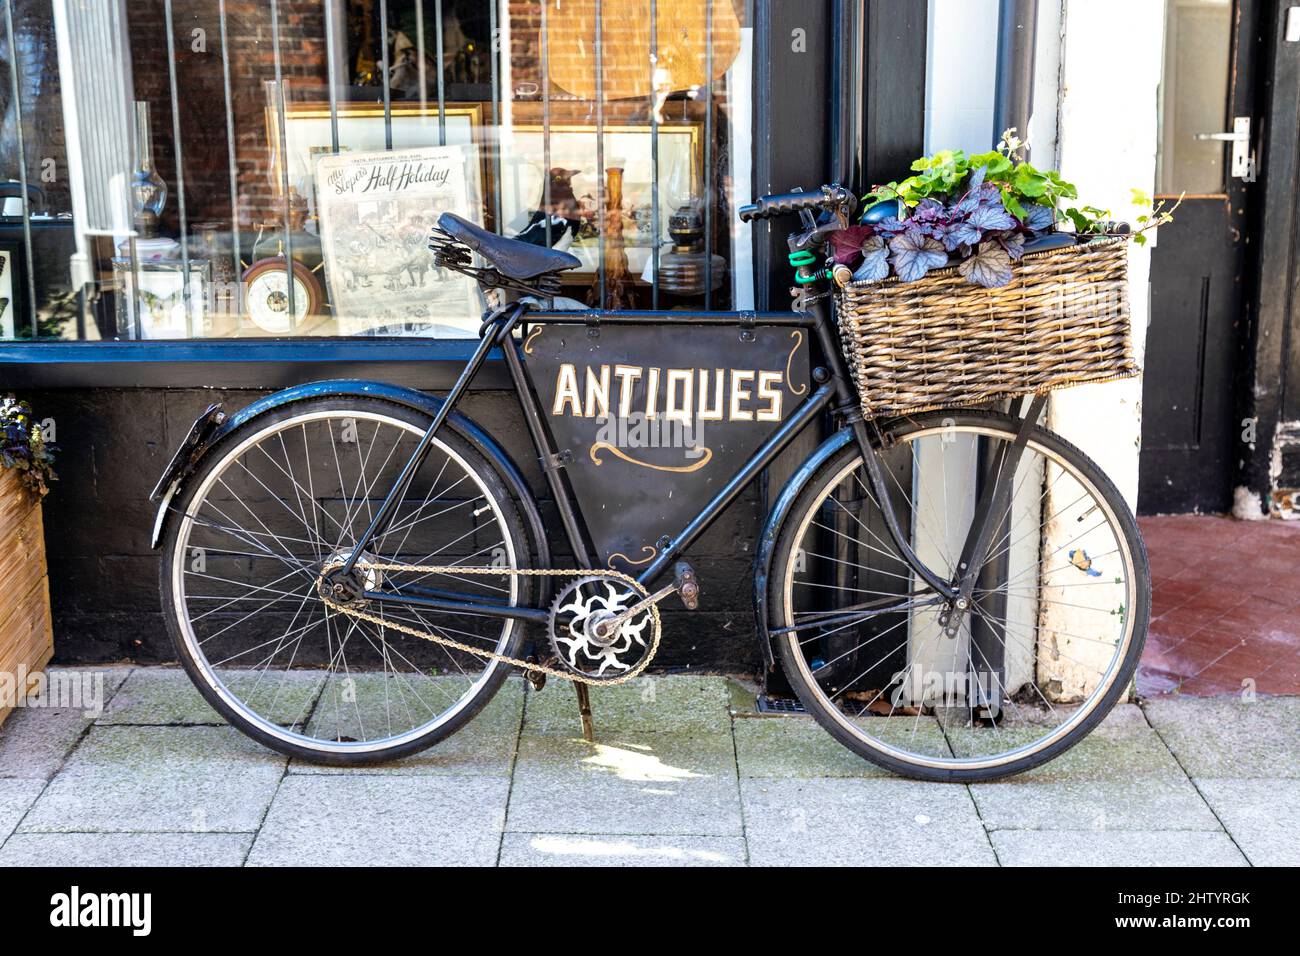 A decorative bicycle outside Blackfriars Antiques shop on Tower Street, King's Lynn, England, UK Stock Photo